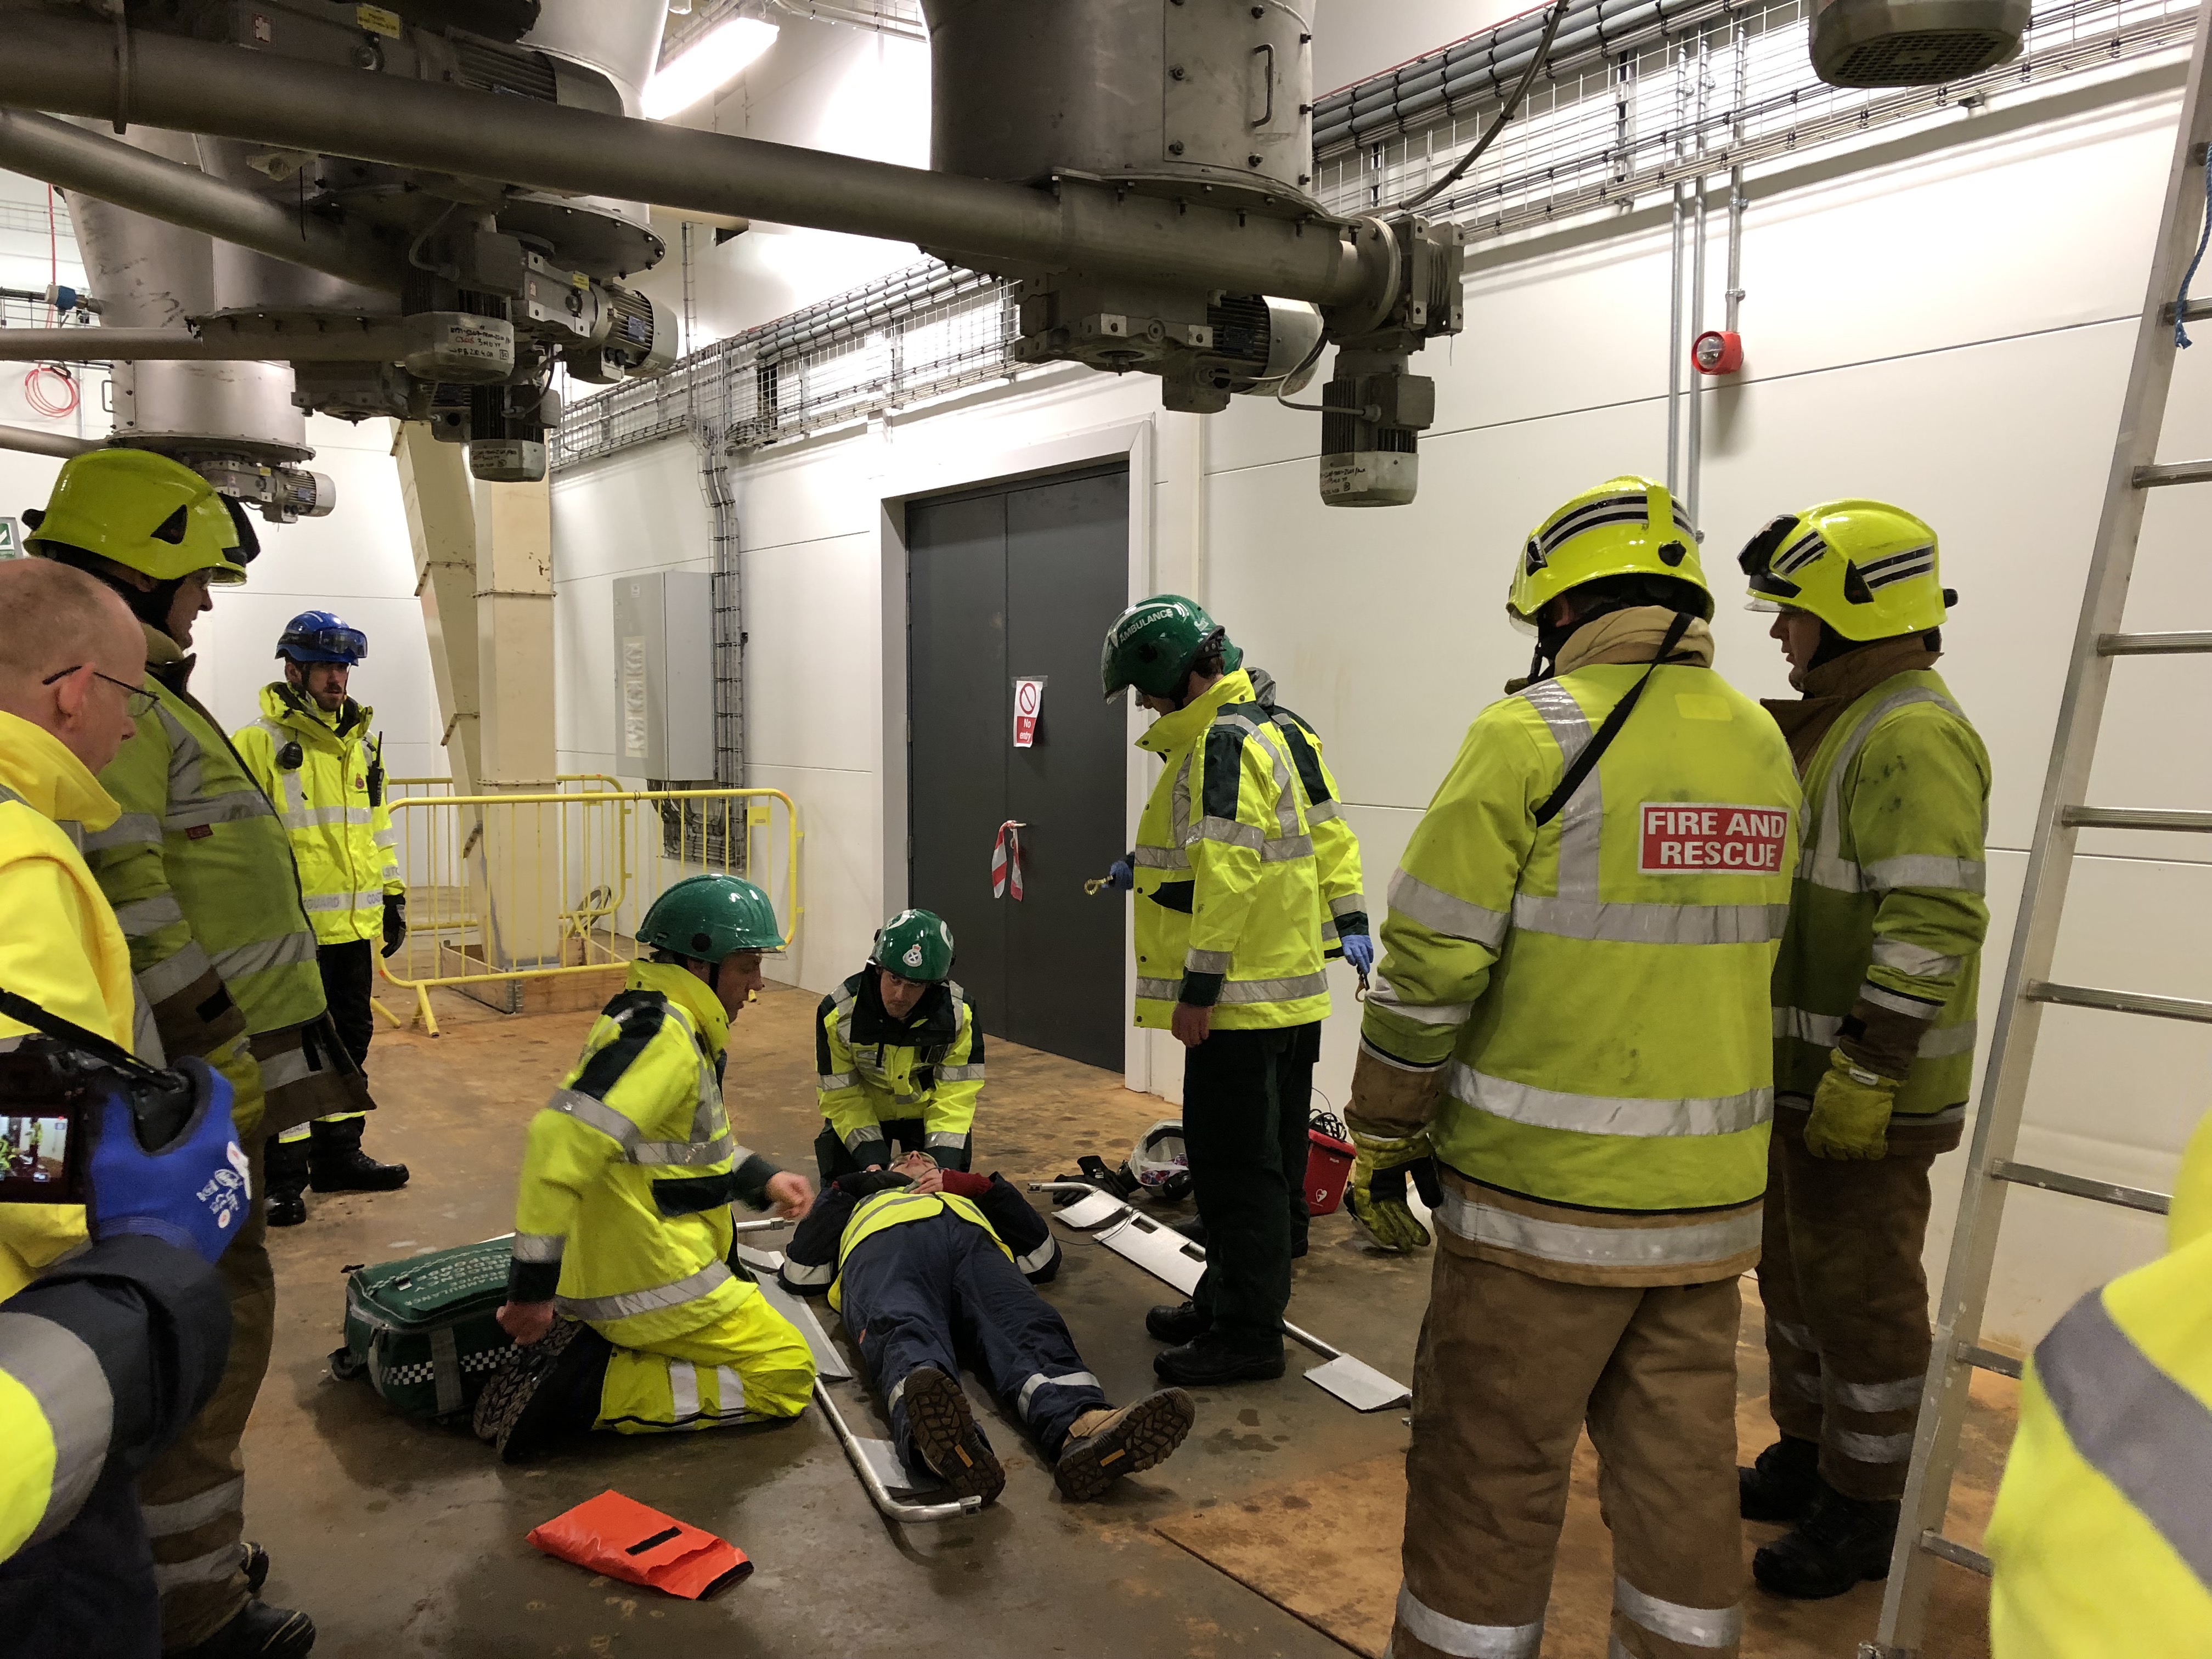 Emergency crews working on a major head injury scenario presented at the training day at the Mowi Fish Feed Plant in Kyleakin